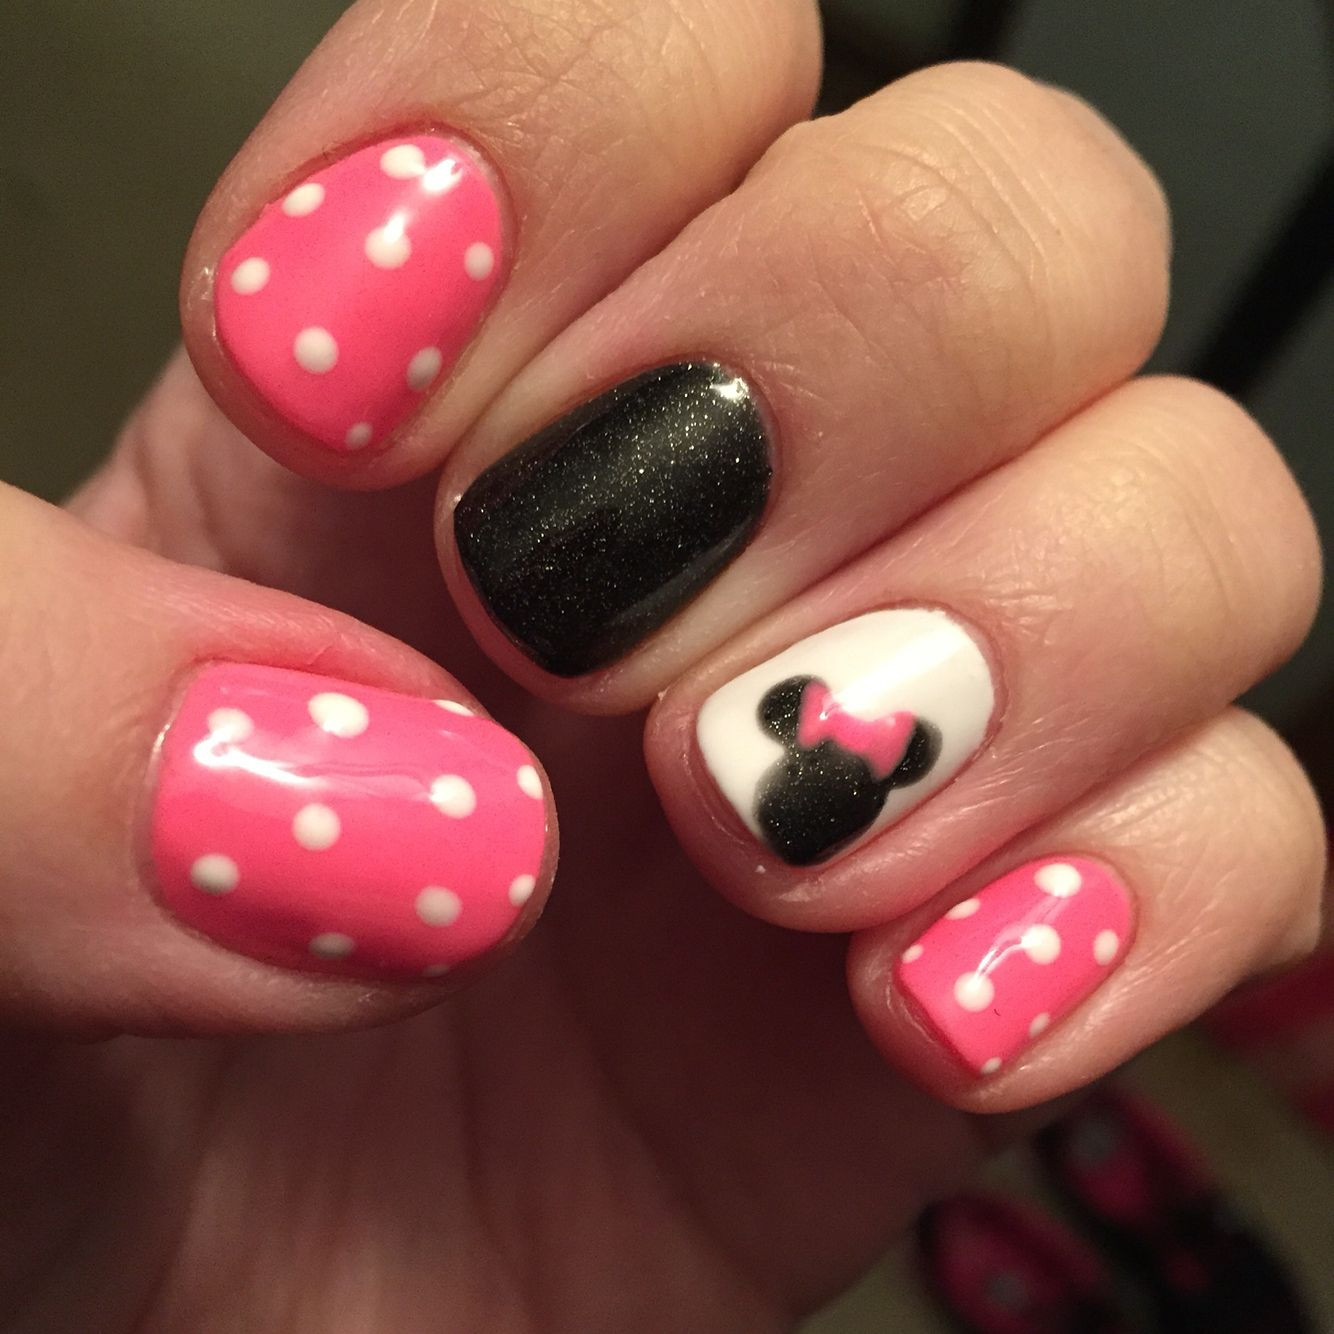 Pretty Nails Milford Ma
 My Minnie Mouse Nails L A Nails Milford Ma in 2019